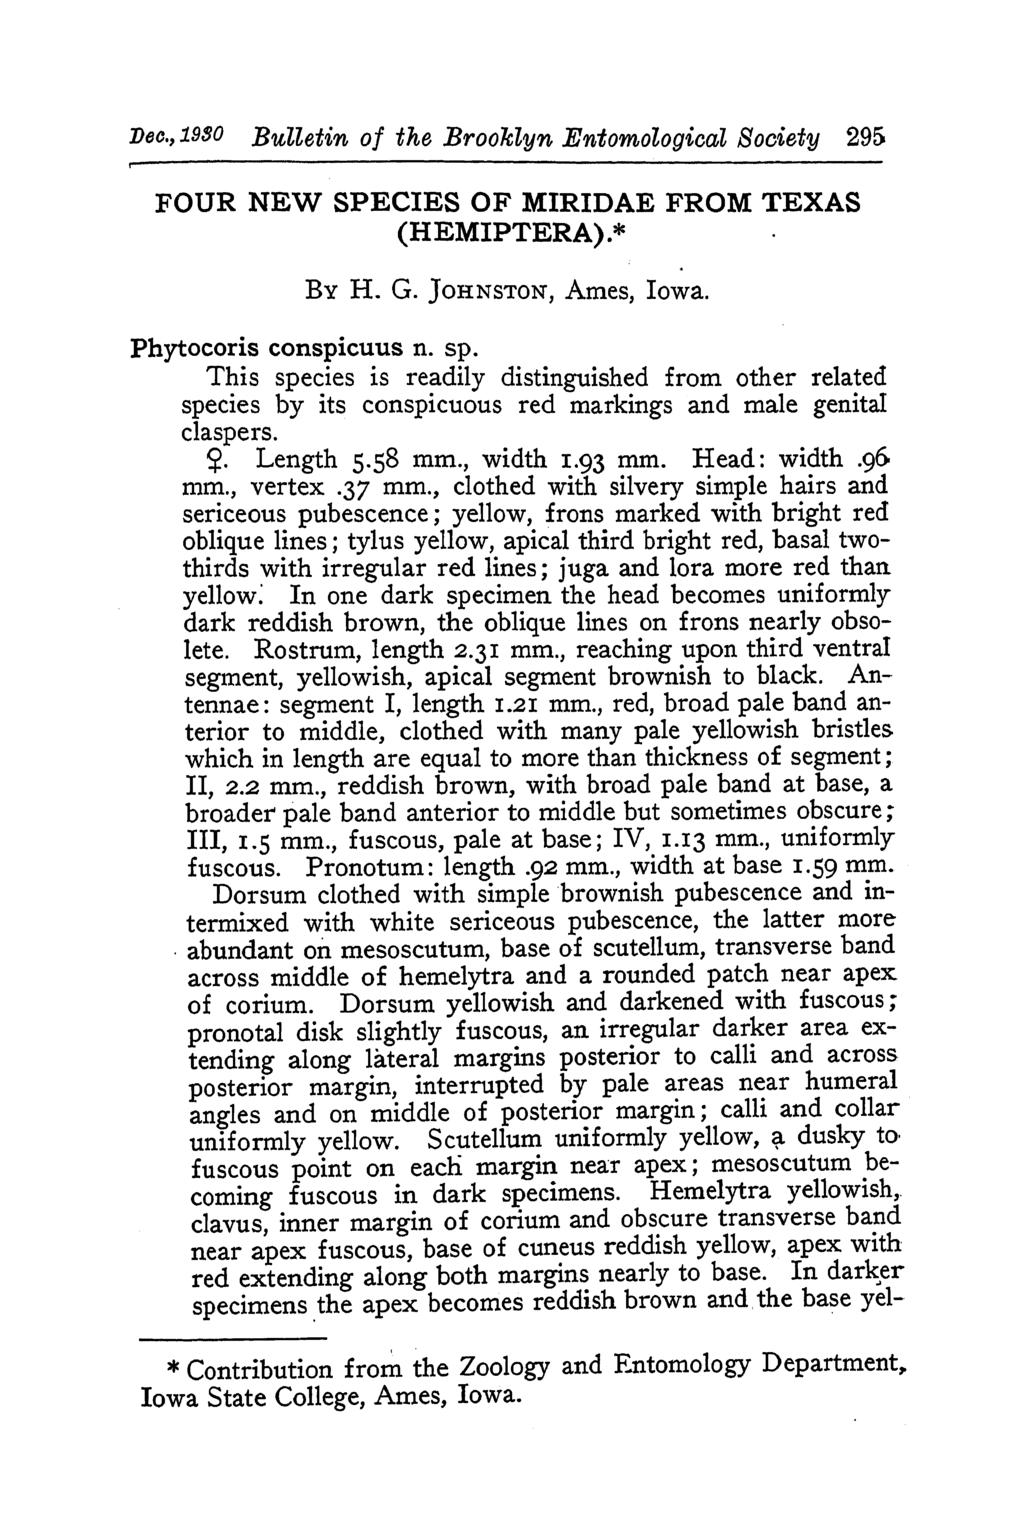 Dec., 19930 Bulletin of the Brooklyn Entomological Society 295 FOUR NEW SPECIES OF MIRIDAE FROM TEXAS (HEMIPTERA).* By H. G. JOHNSTON, Ames, Iowa. Phytocoris conspicuus n. sp.